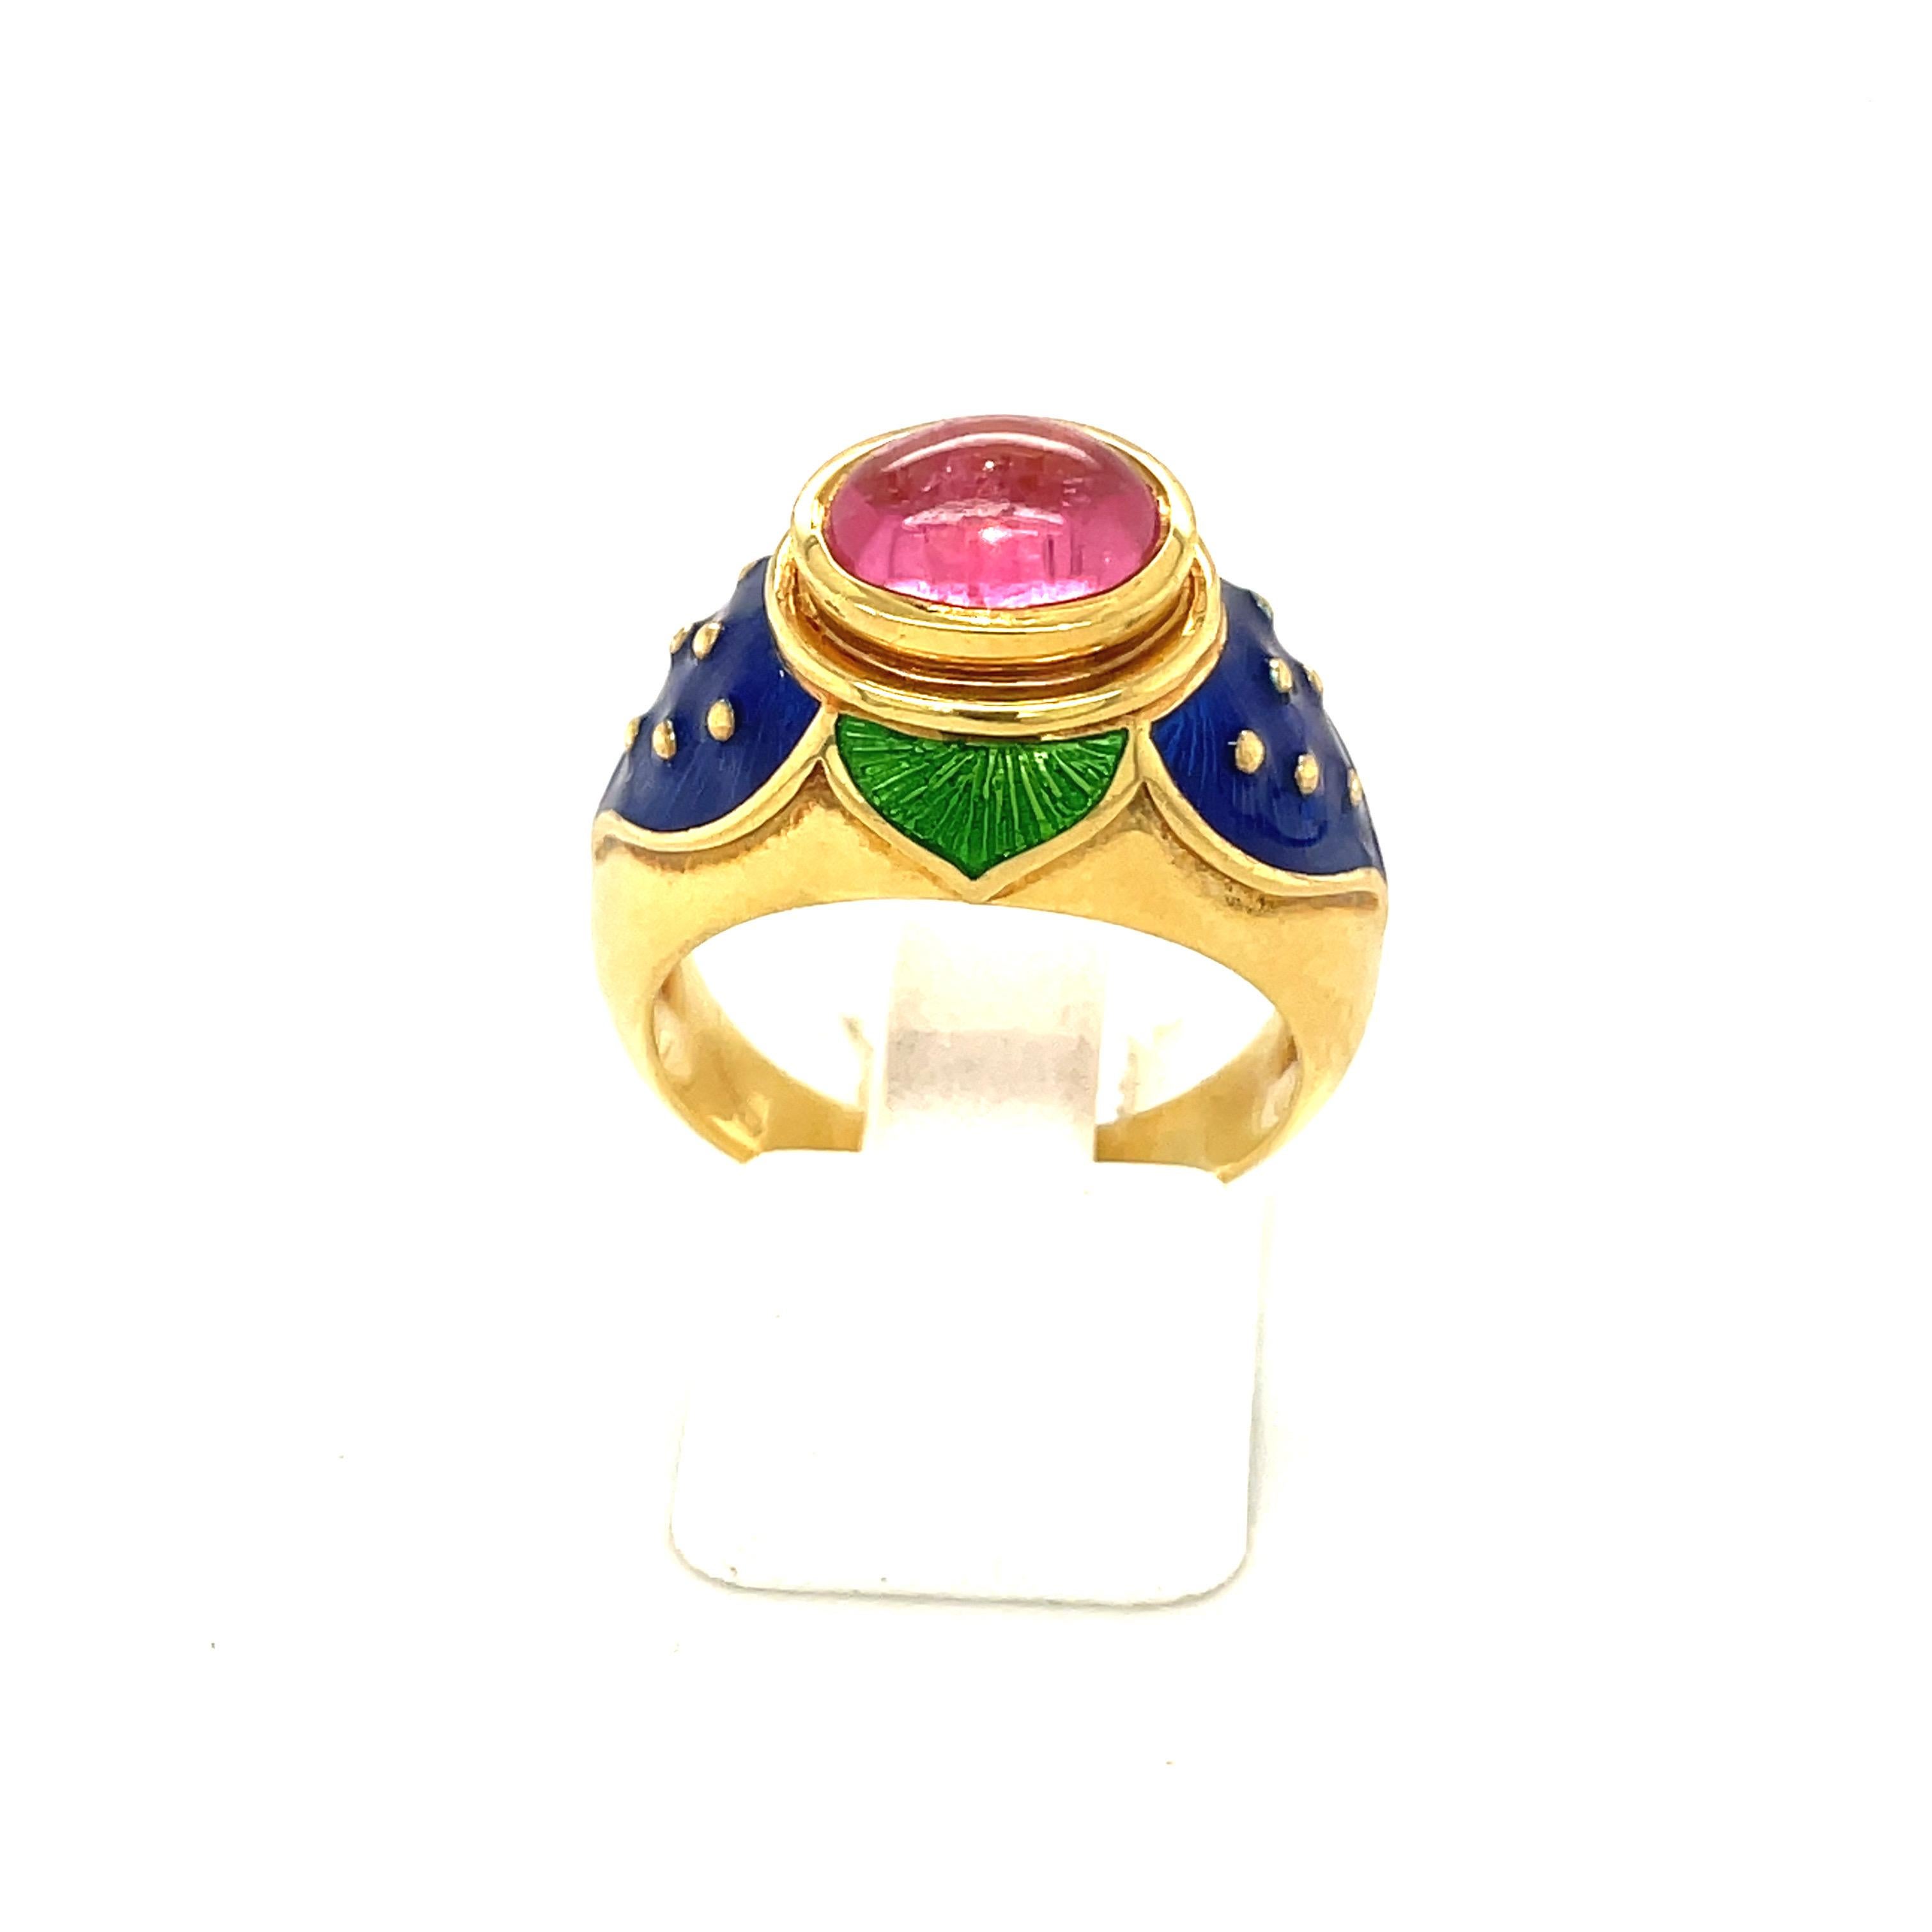 Cellini 18KT YG Ring with Cabochon Pink Tourmaline Center & Blue & Green Enamel For Sale 2